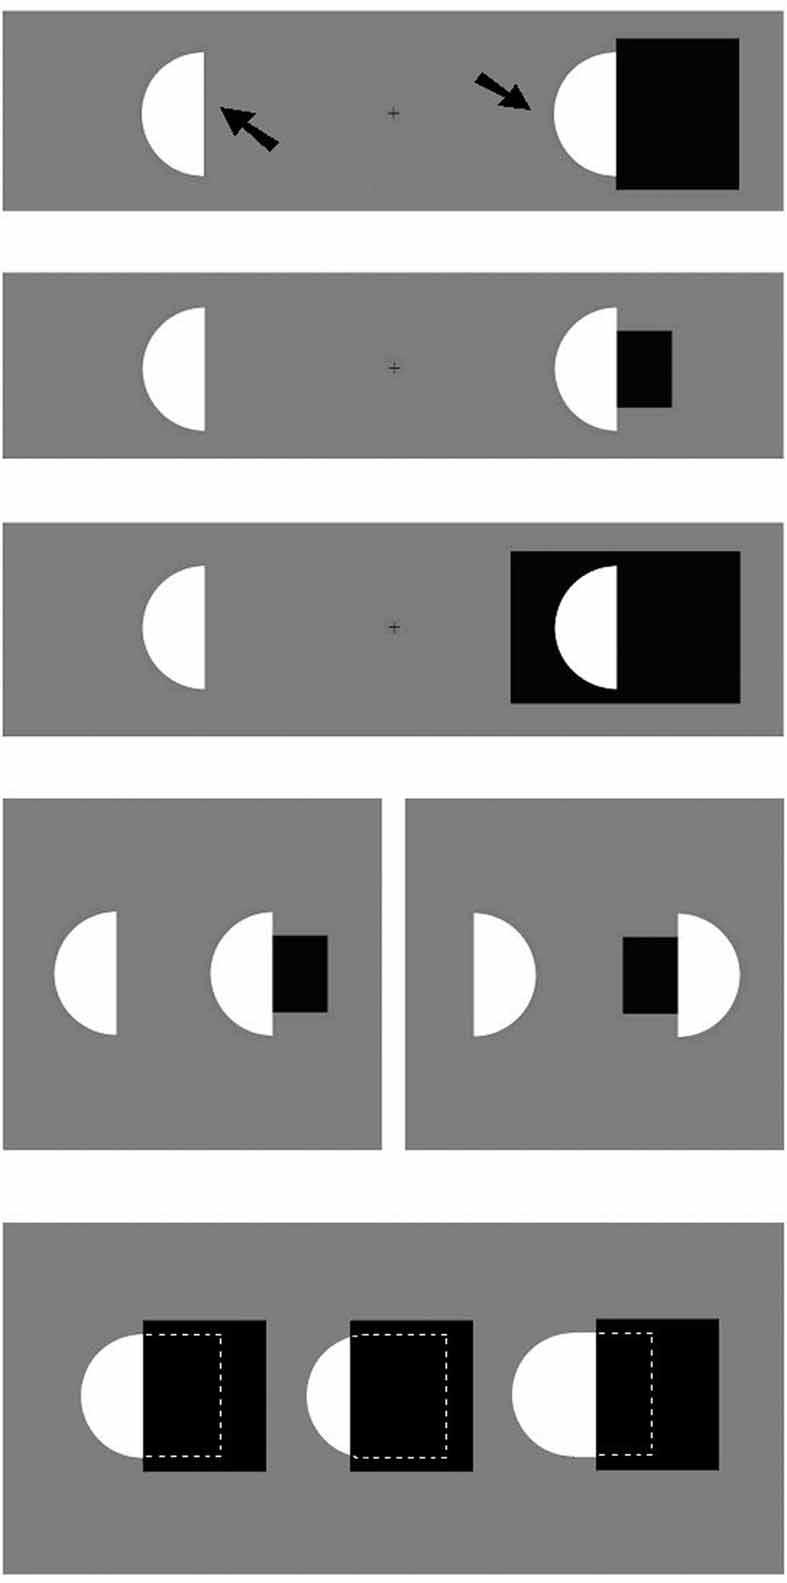 The occlusion illusion 653 Target (a) Standard (b) (c) (d) (e) (f) Figure 2. The displays for experiment 1. (a) The occluded condition. (b) The occluding condition. (c) The surrounded condition.